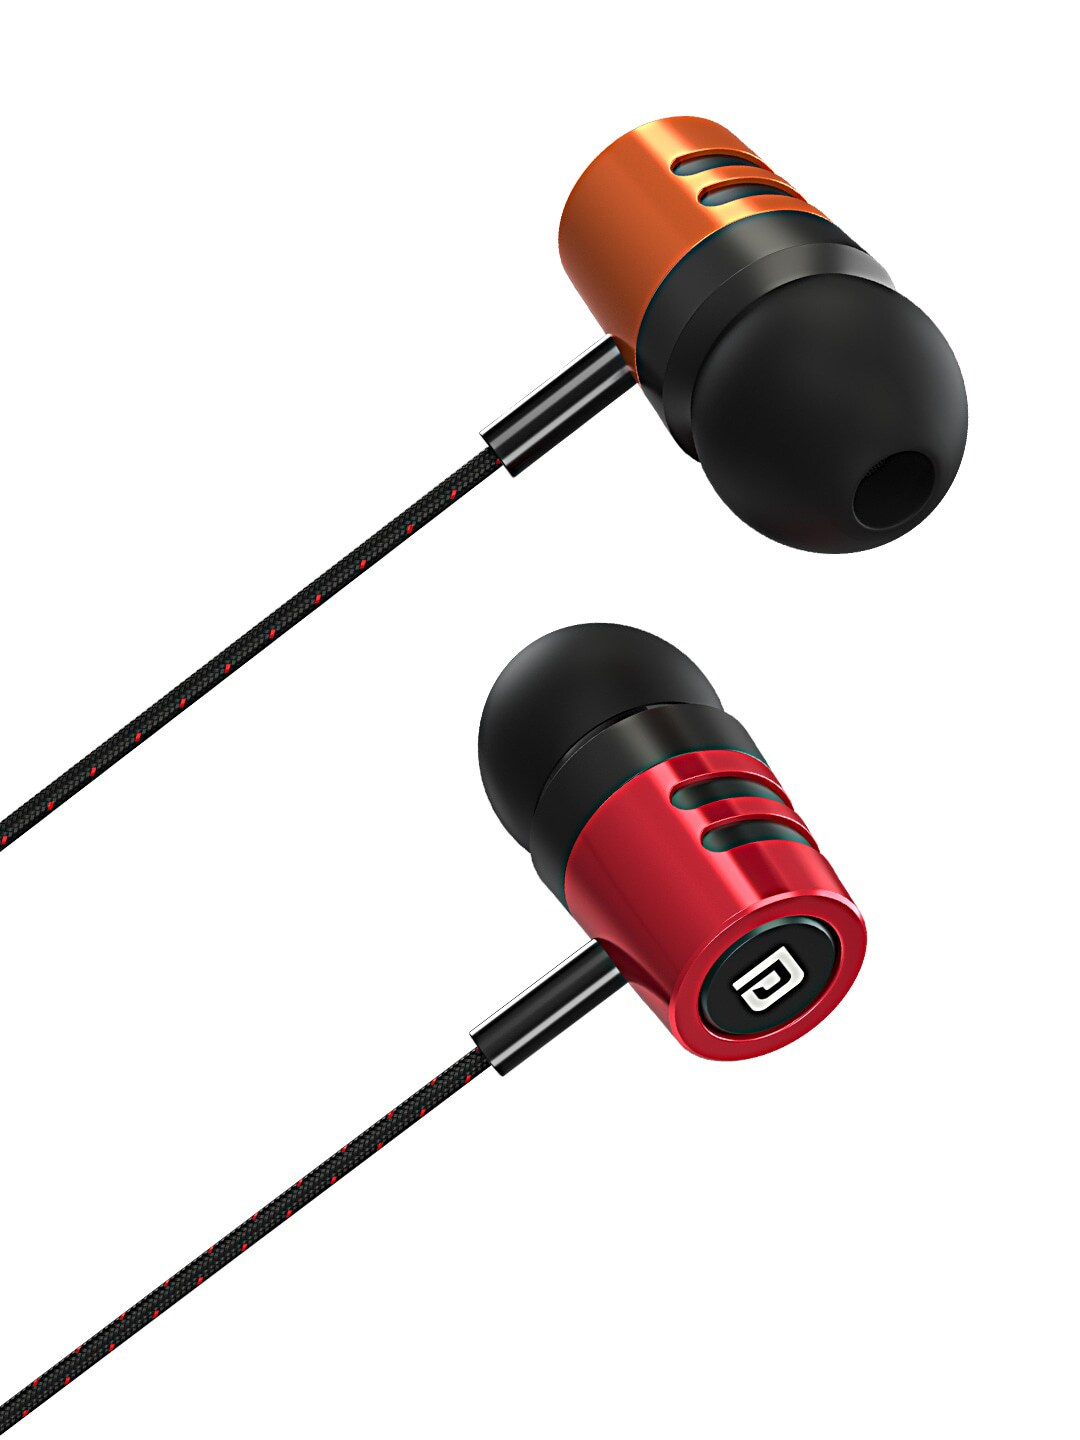 Portronics Black Solid Ear 2 In-Ear Wired Earphones Price in India